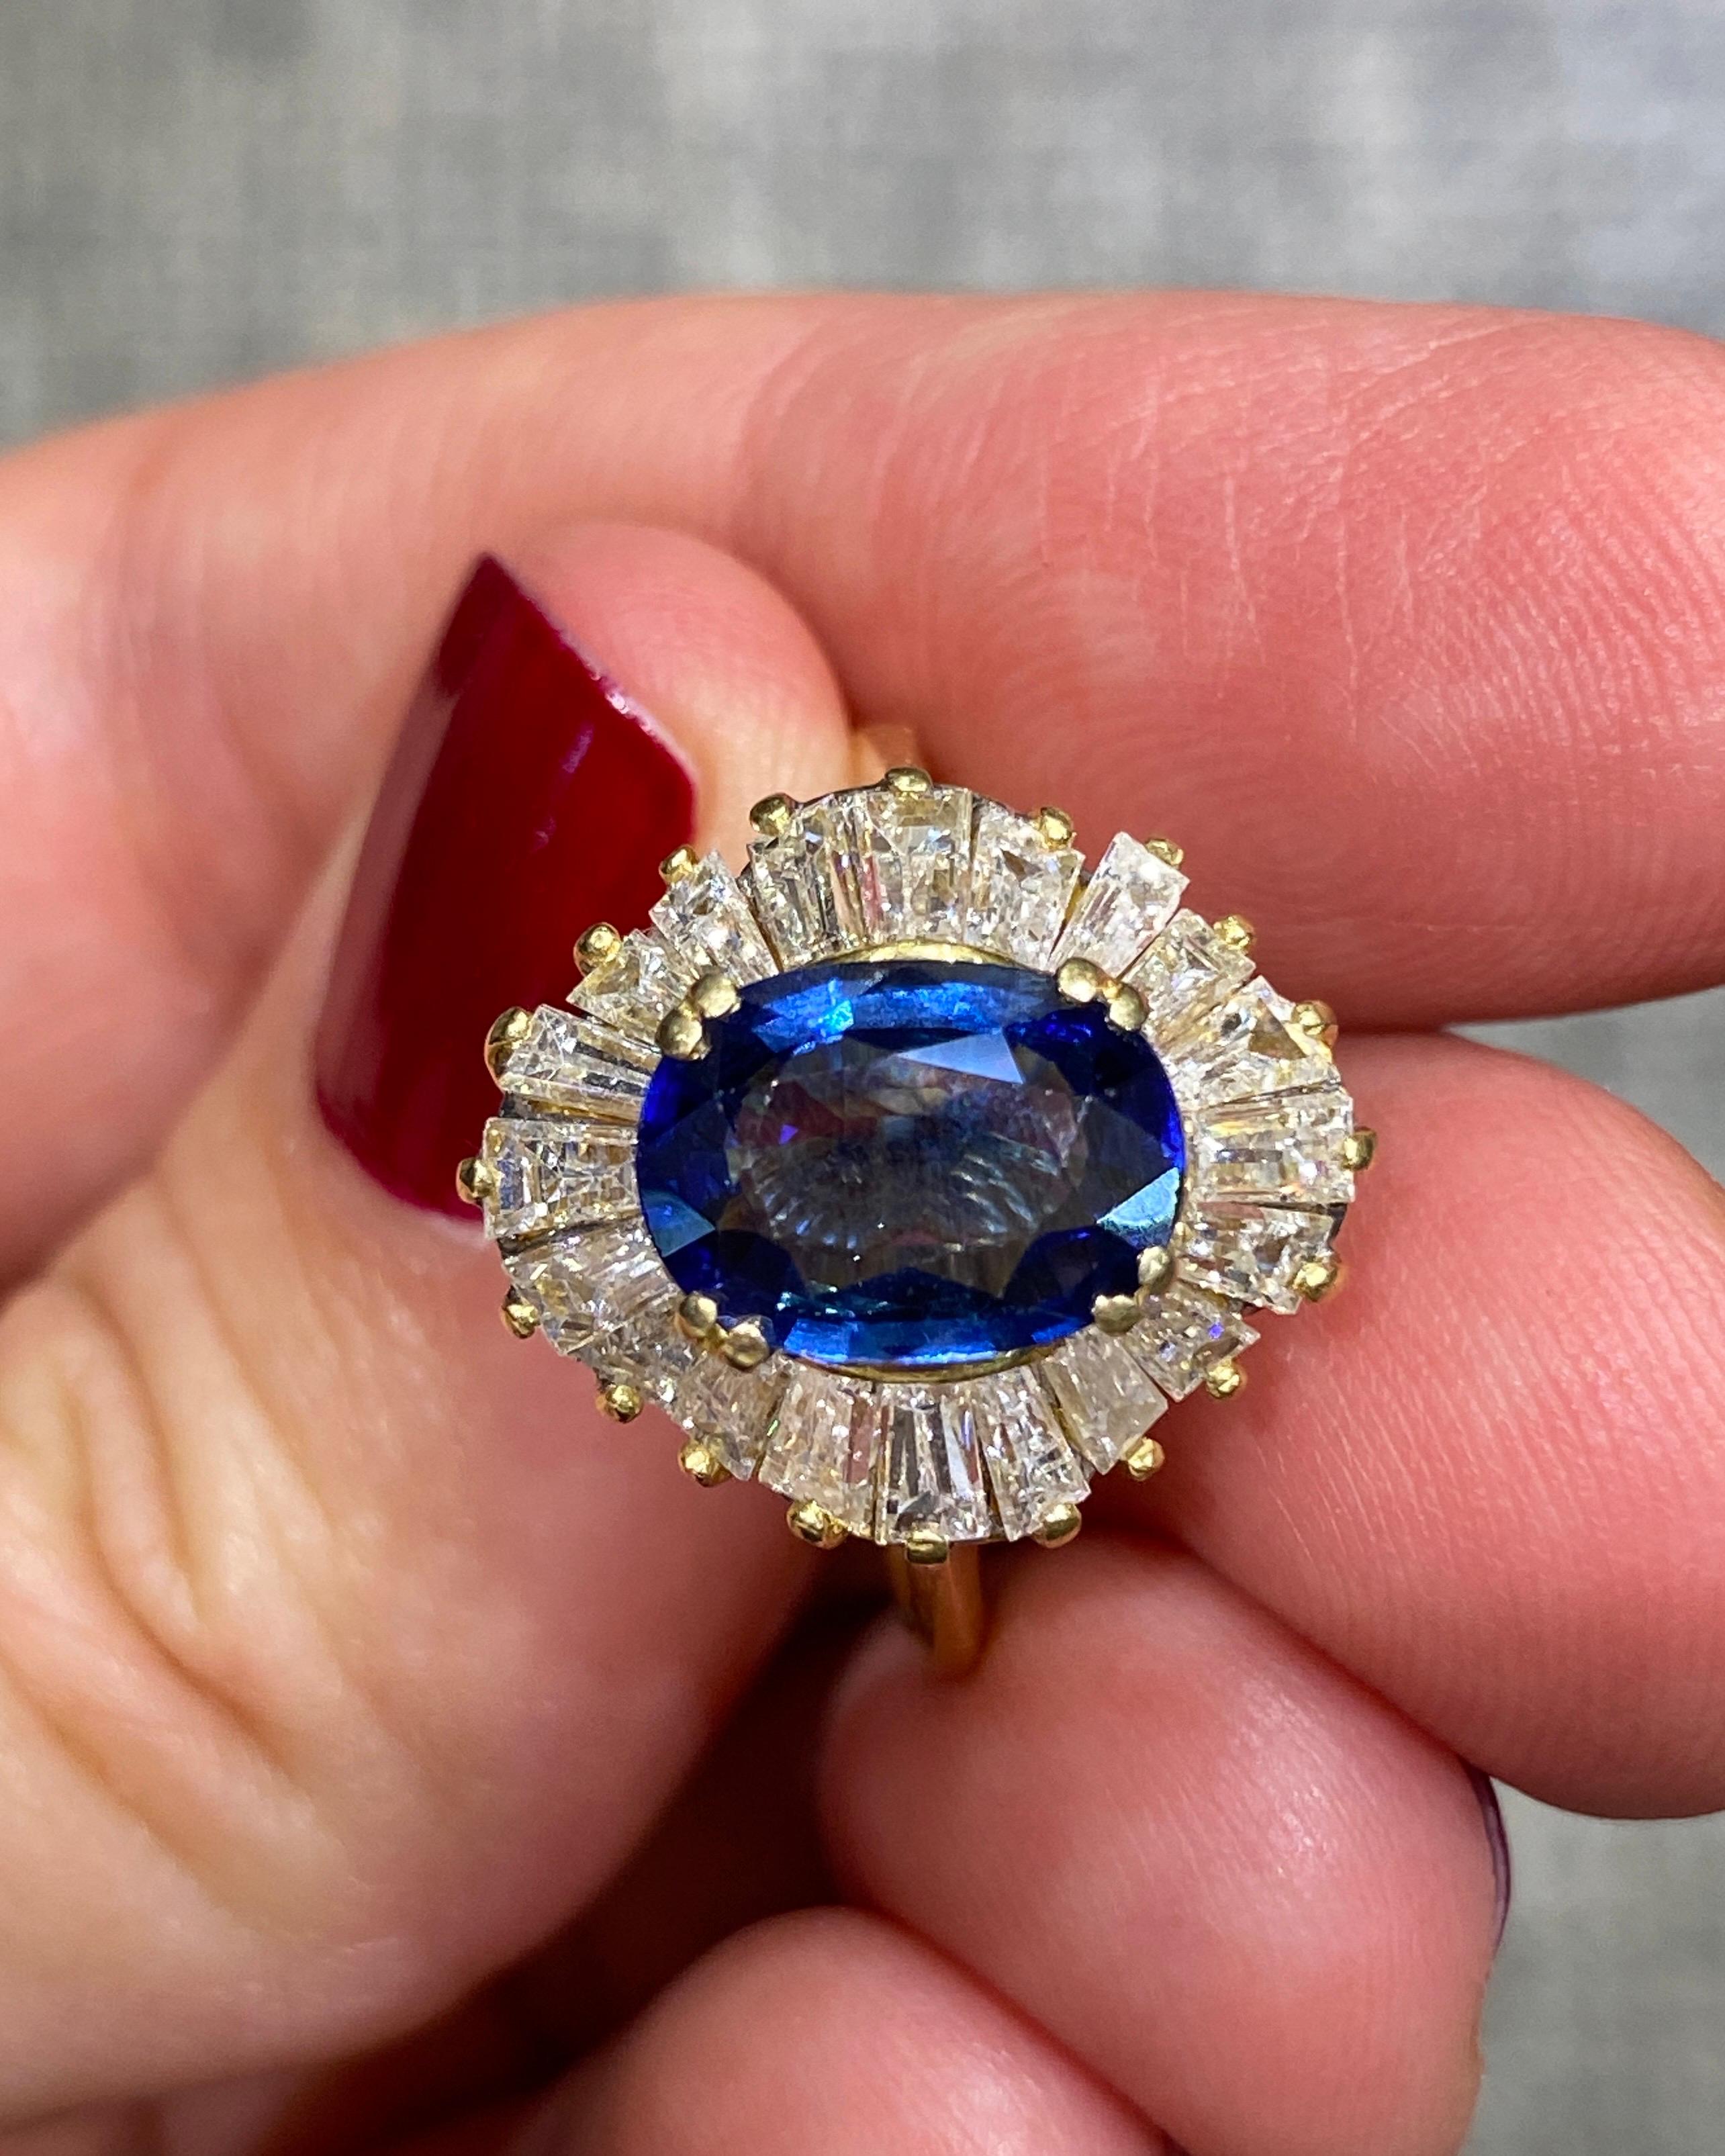 Tapered Baguette 1950s Italian 2.5 carat Ceylon Sapphire and 1.5 c tapered baguette diamond ring For Sale